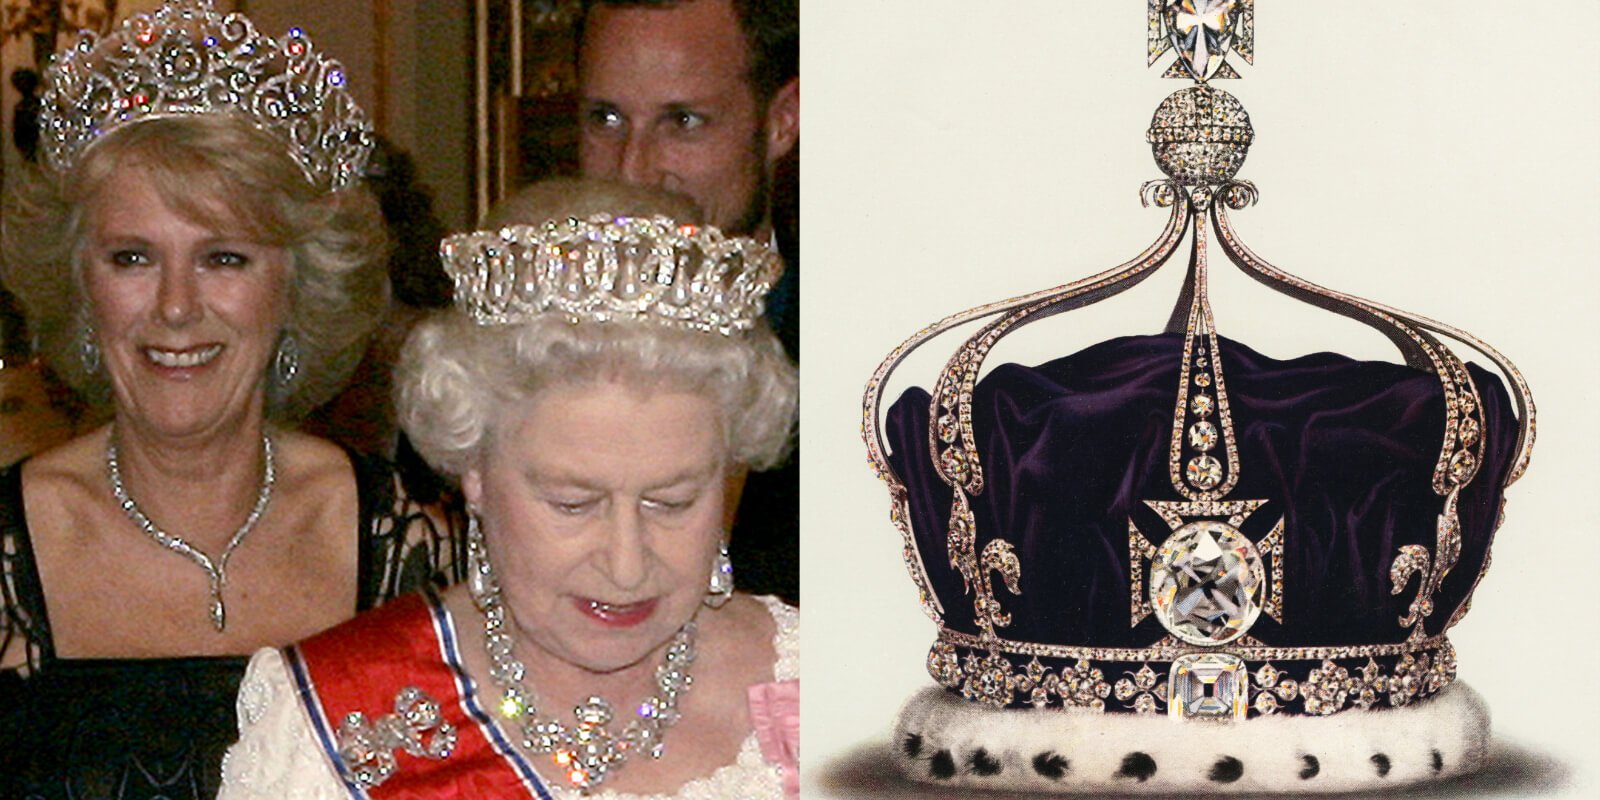 Camilla Parker Bowles, Queen Elizabeth and the Queen Mary Crown in side by side images.